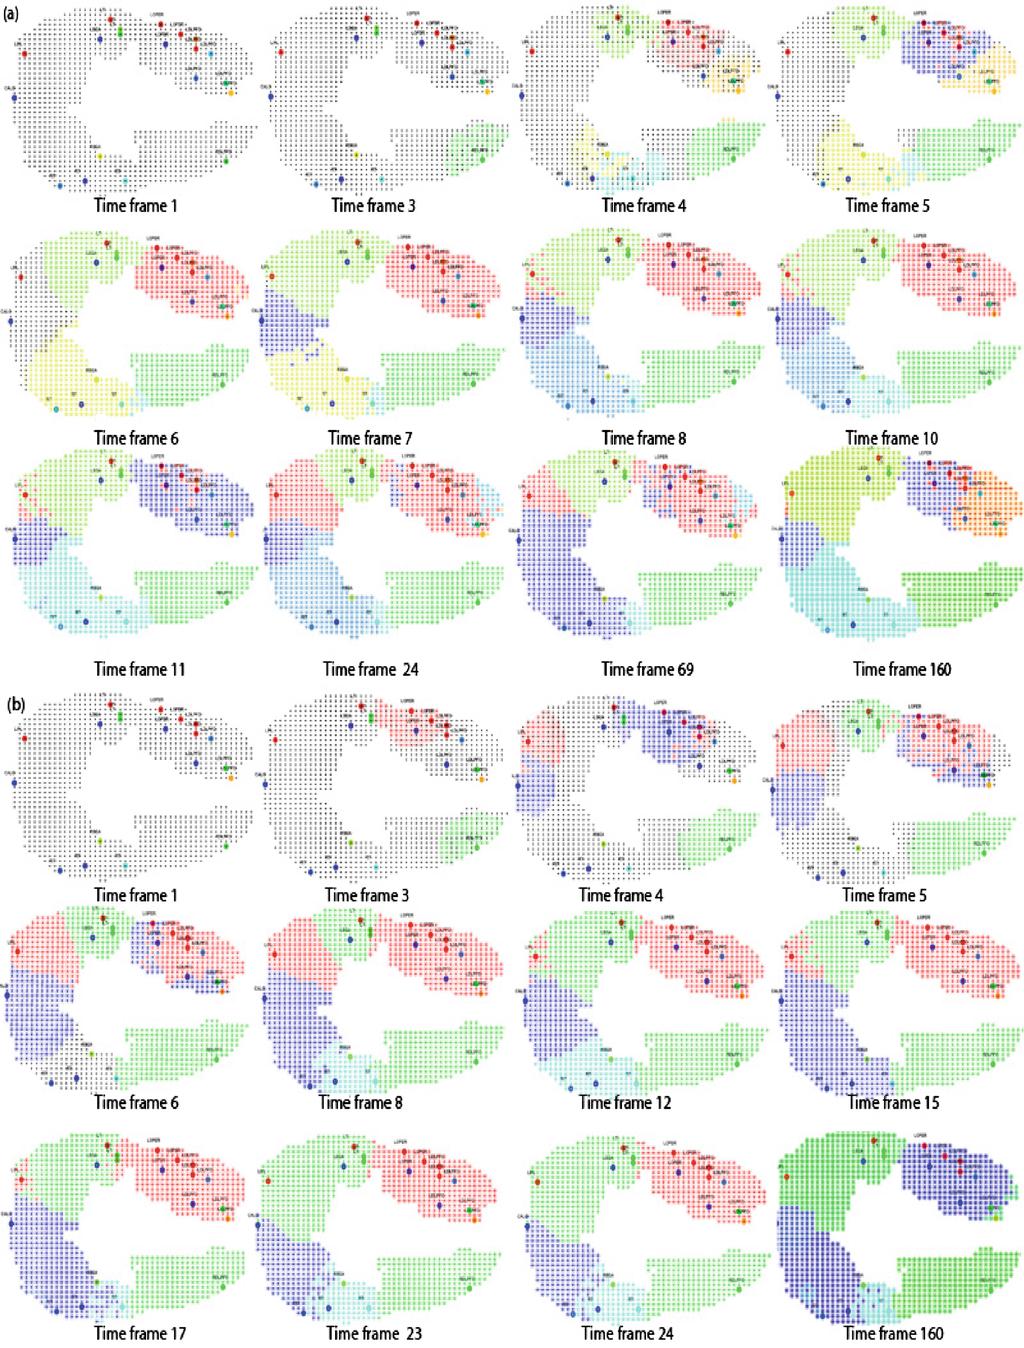 196 M.G. Doborjeh and N. Kasabov Fig. 3. Clusters centroids are predeﬁned and labeled by diﬀerent colors. Before training the SNNc by fmri data streams, the clusters had no members.